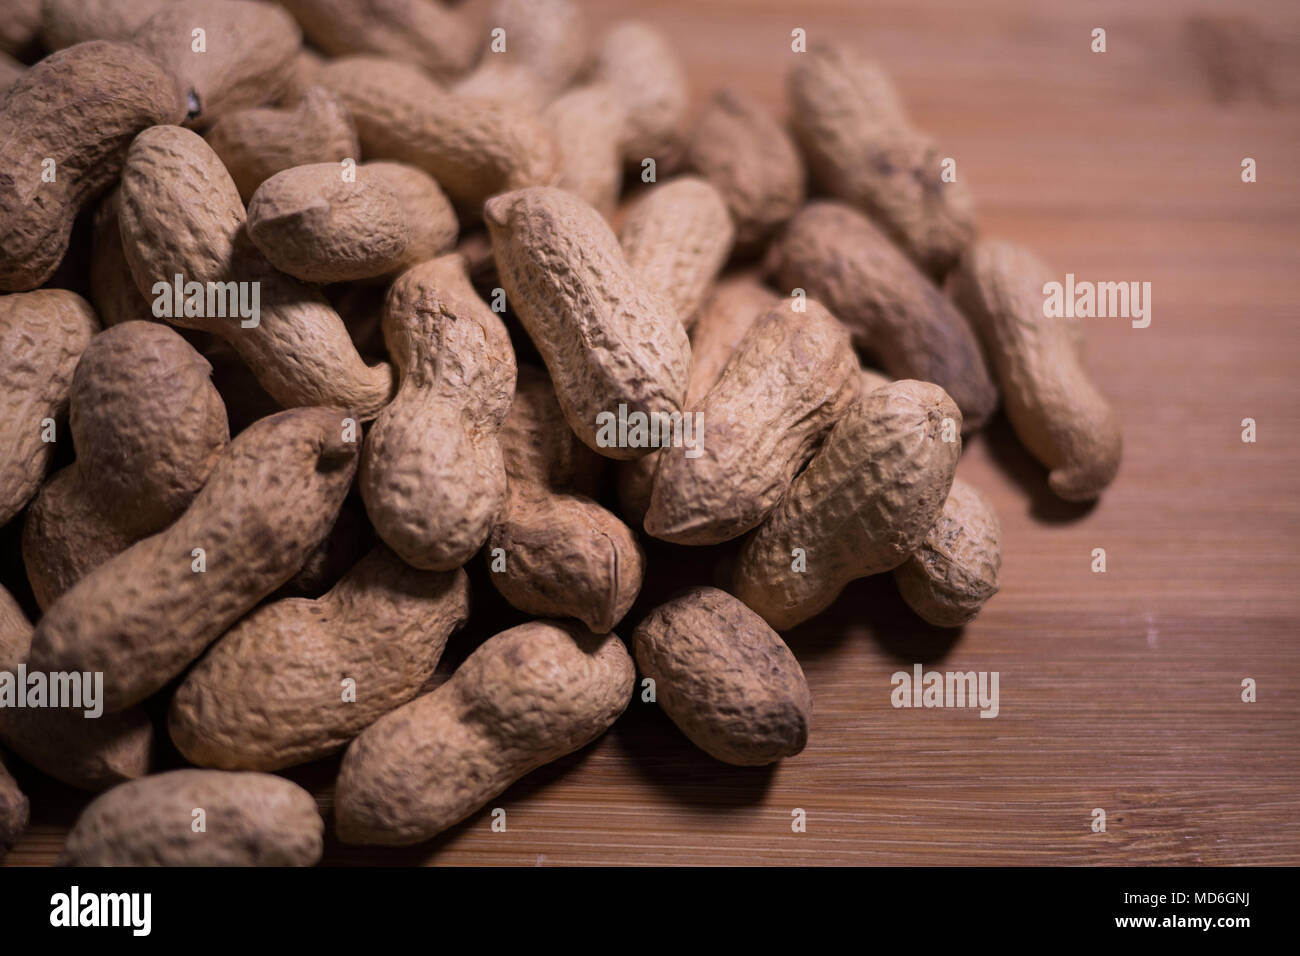 Pile of unshelled natural peanuts in the shell on a wooden grained background and natural light with shadows. Stock Photo